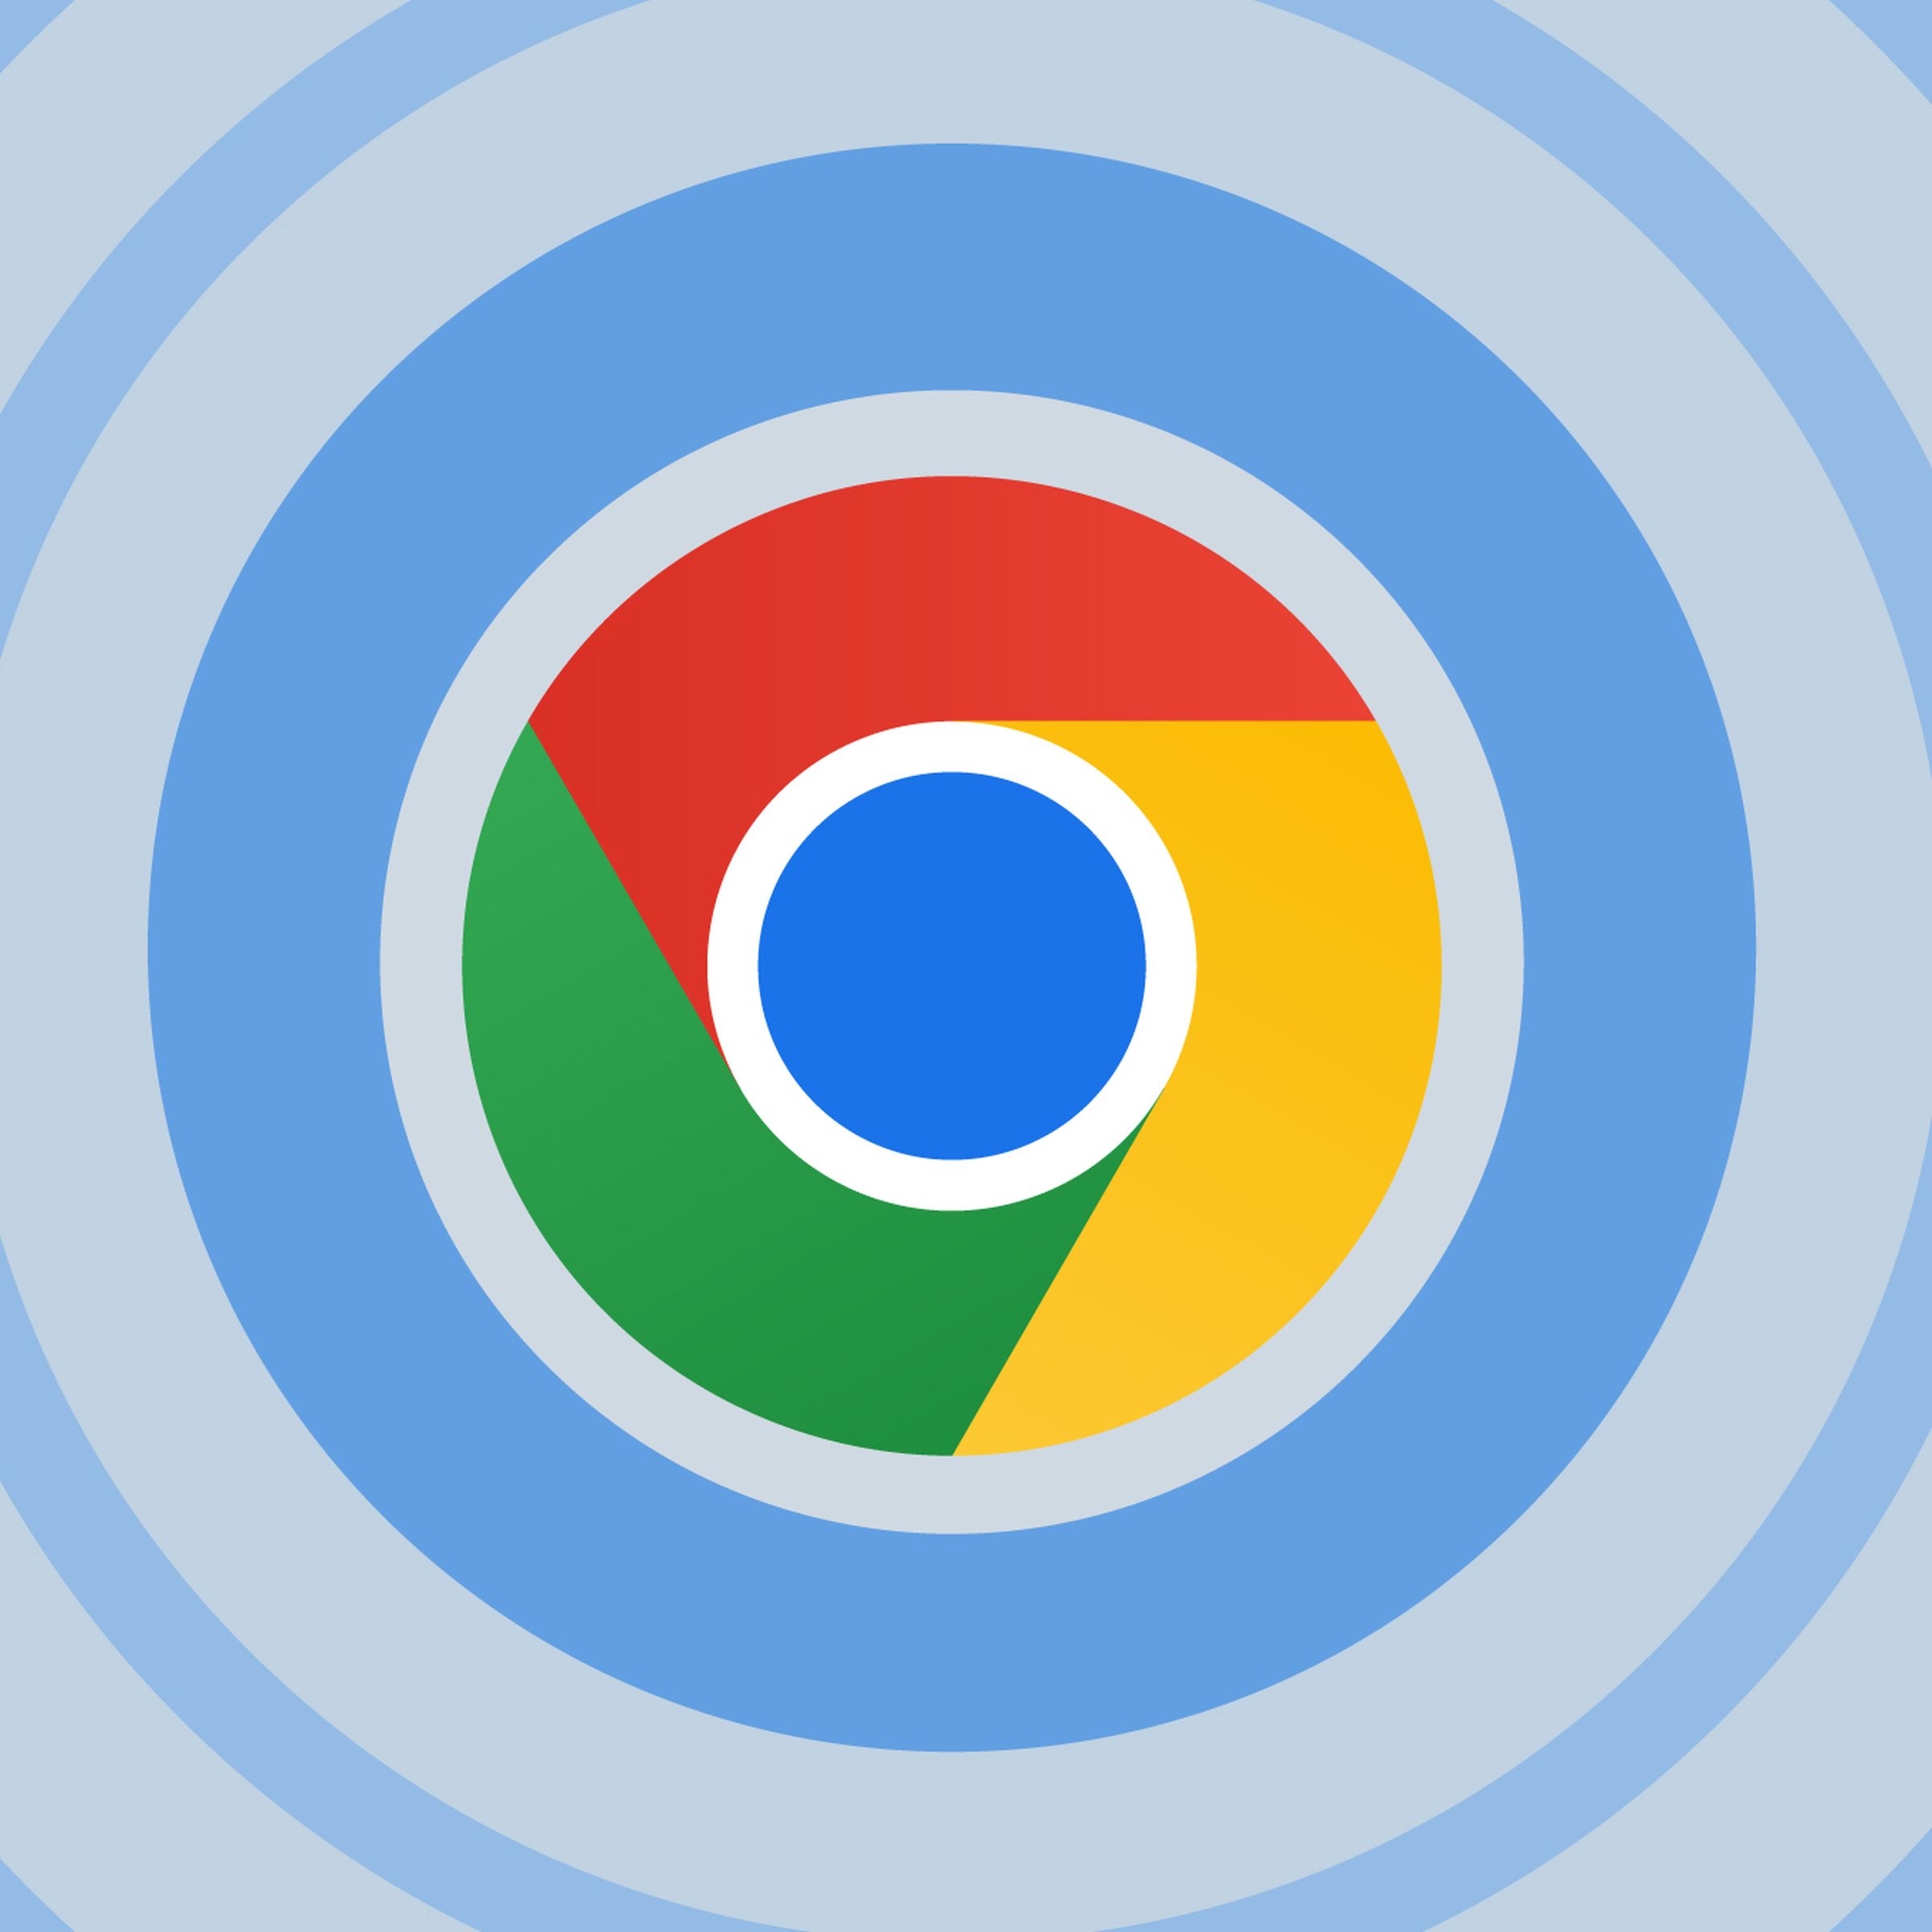 The Google Chrome logo surrounded by blue rings